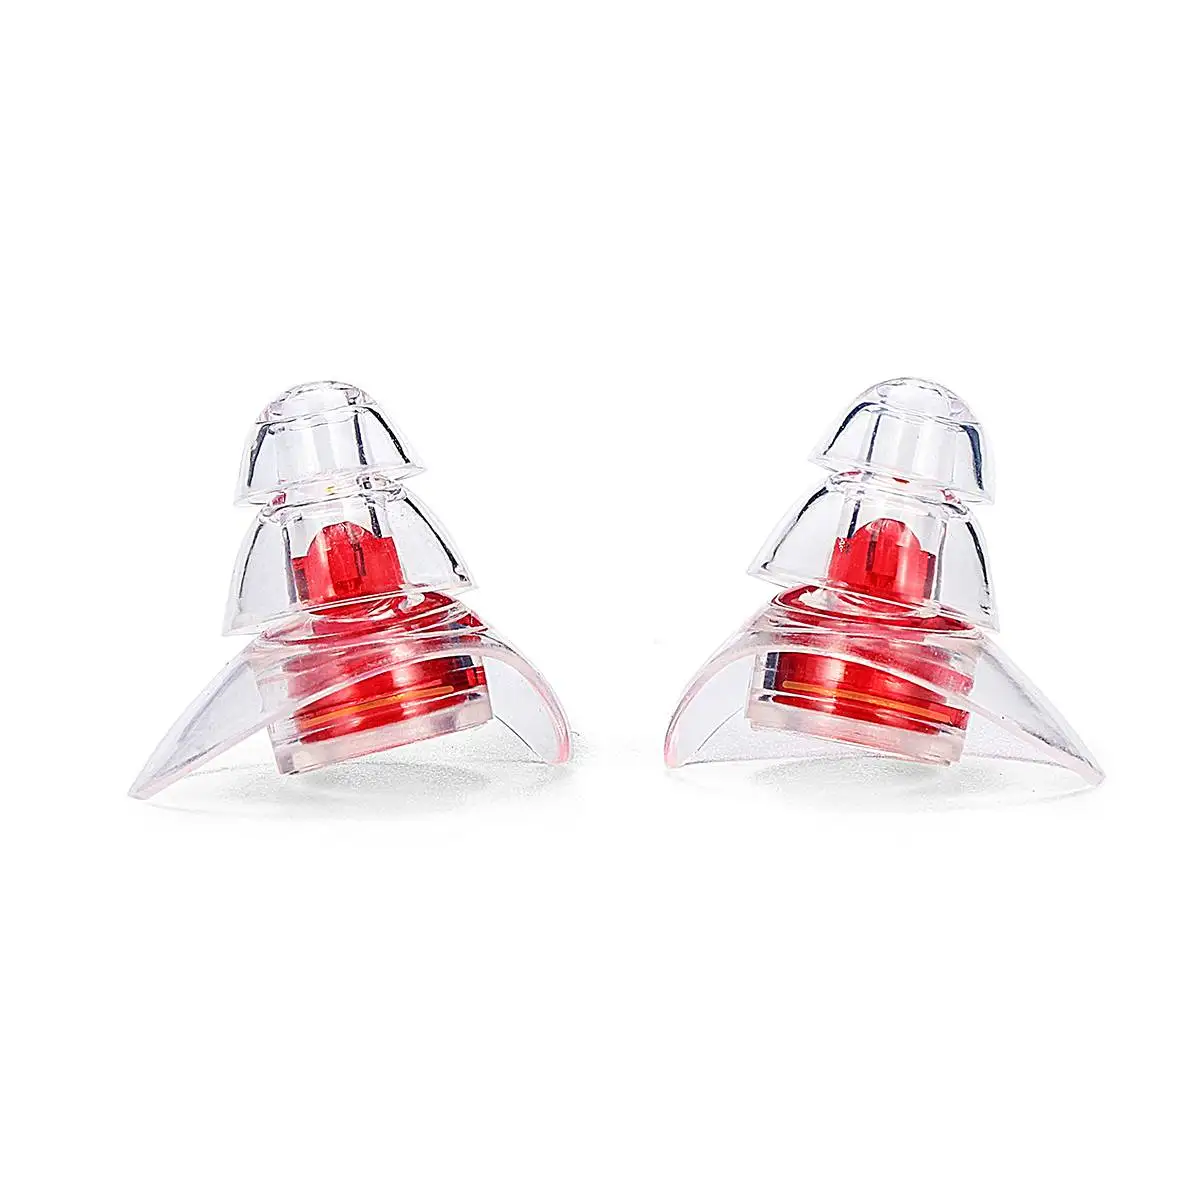 1 Pair Soft Silicone Ear Plugs Ear Protection Reusable Professional Music Earplugs Noise Reduction For Travel Sleep DJ Bar Bands